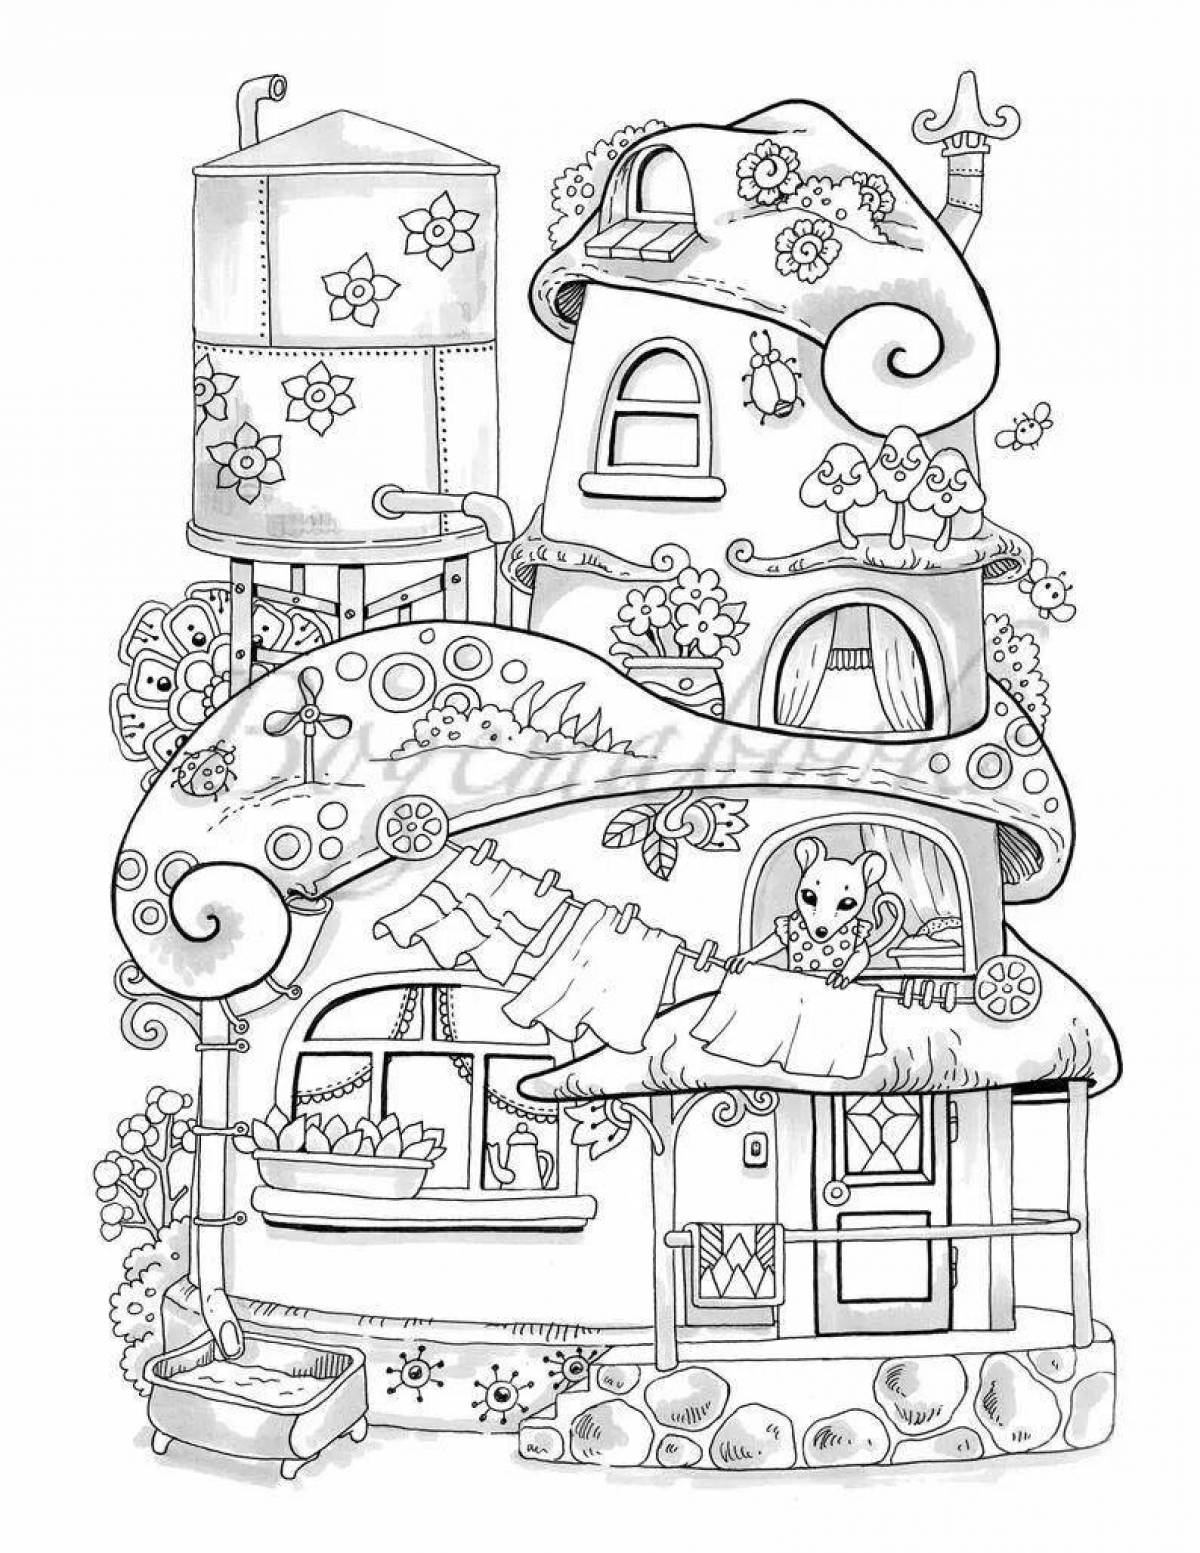 Coloring page amazing house in junland